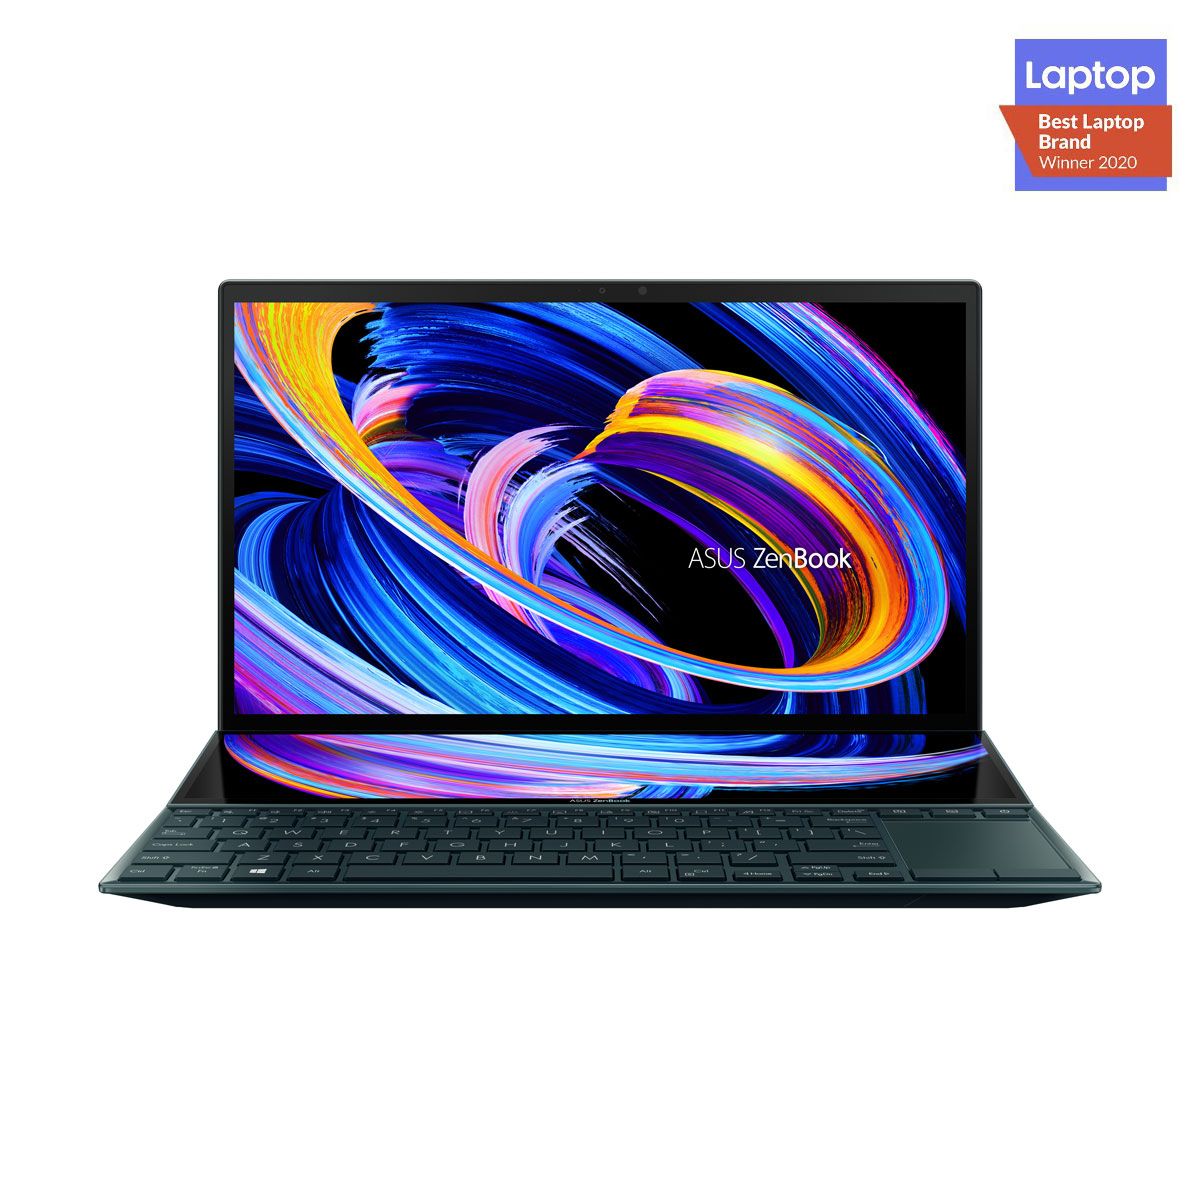 ASUS ZenBook Duo UX482EG-HY004T Laptop i7-1165G7 16GB/1TB SSD/2GB NVIDIA MX450/Win10/14inch FHD Touch/ CelesTial Blue English/Arabic Keyboard with Stylus Pen